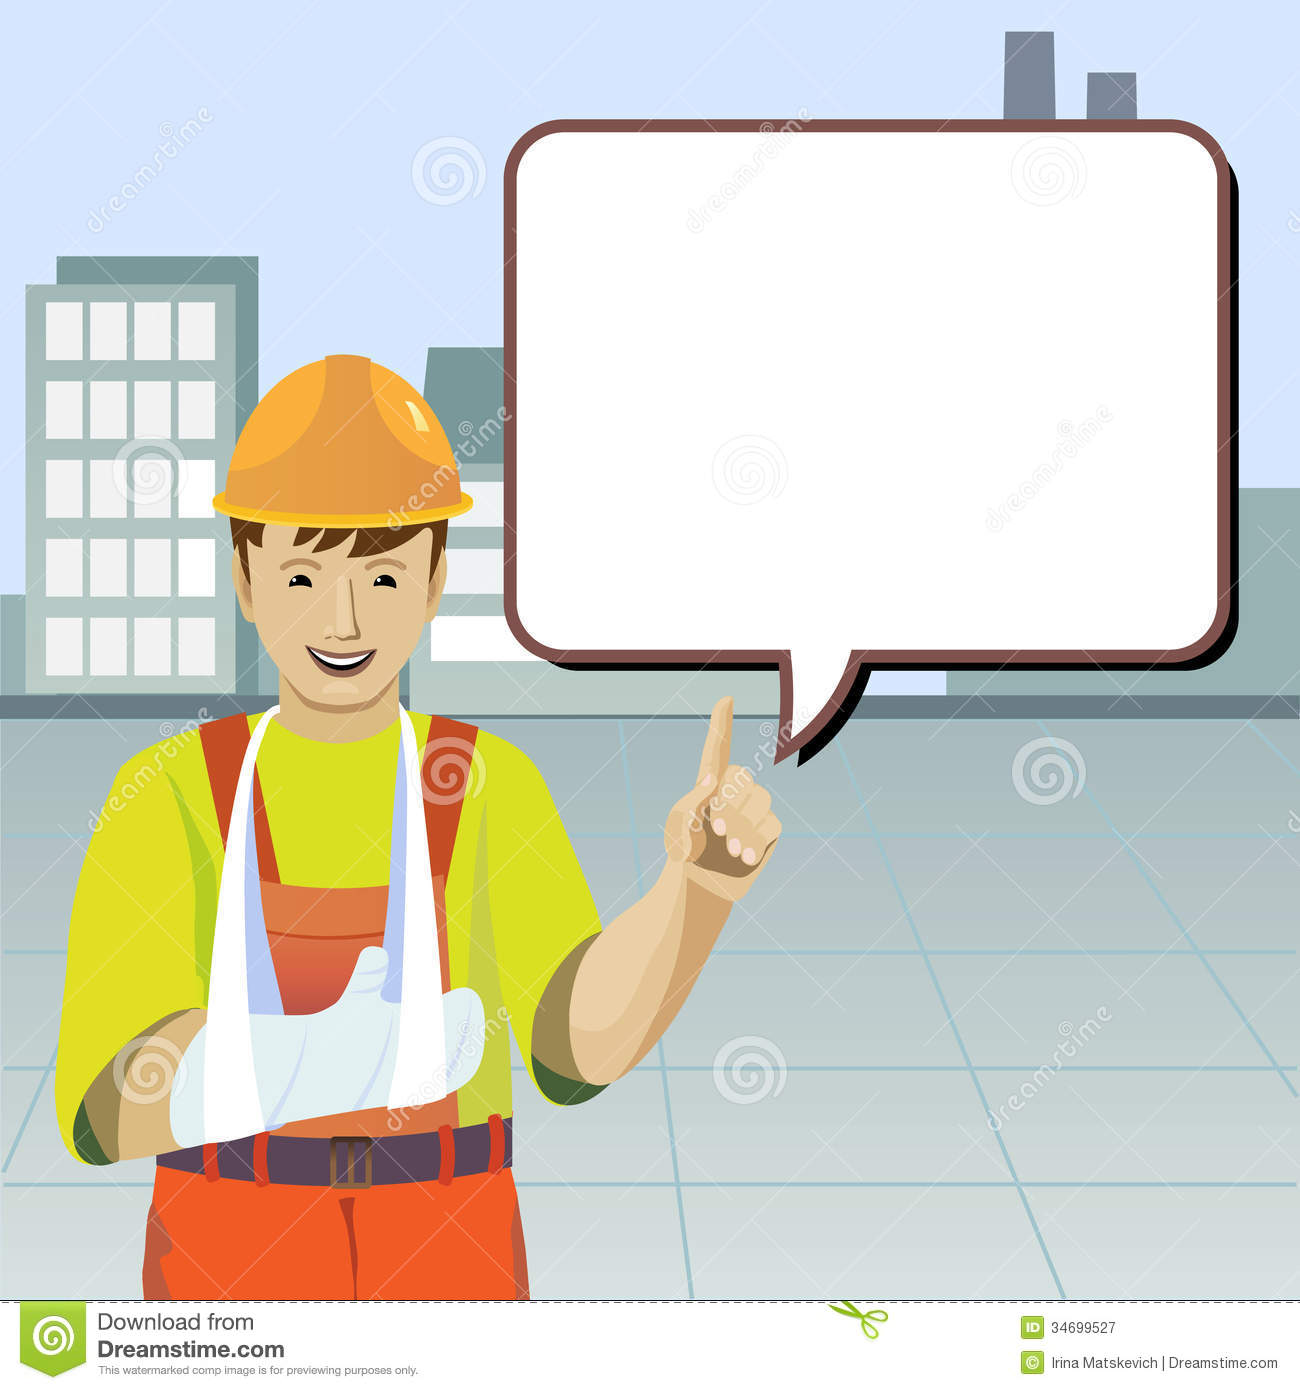 Displaying 20  Images For   Work Accidents Clipart   